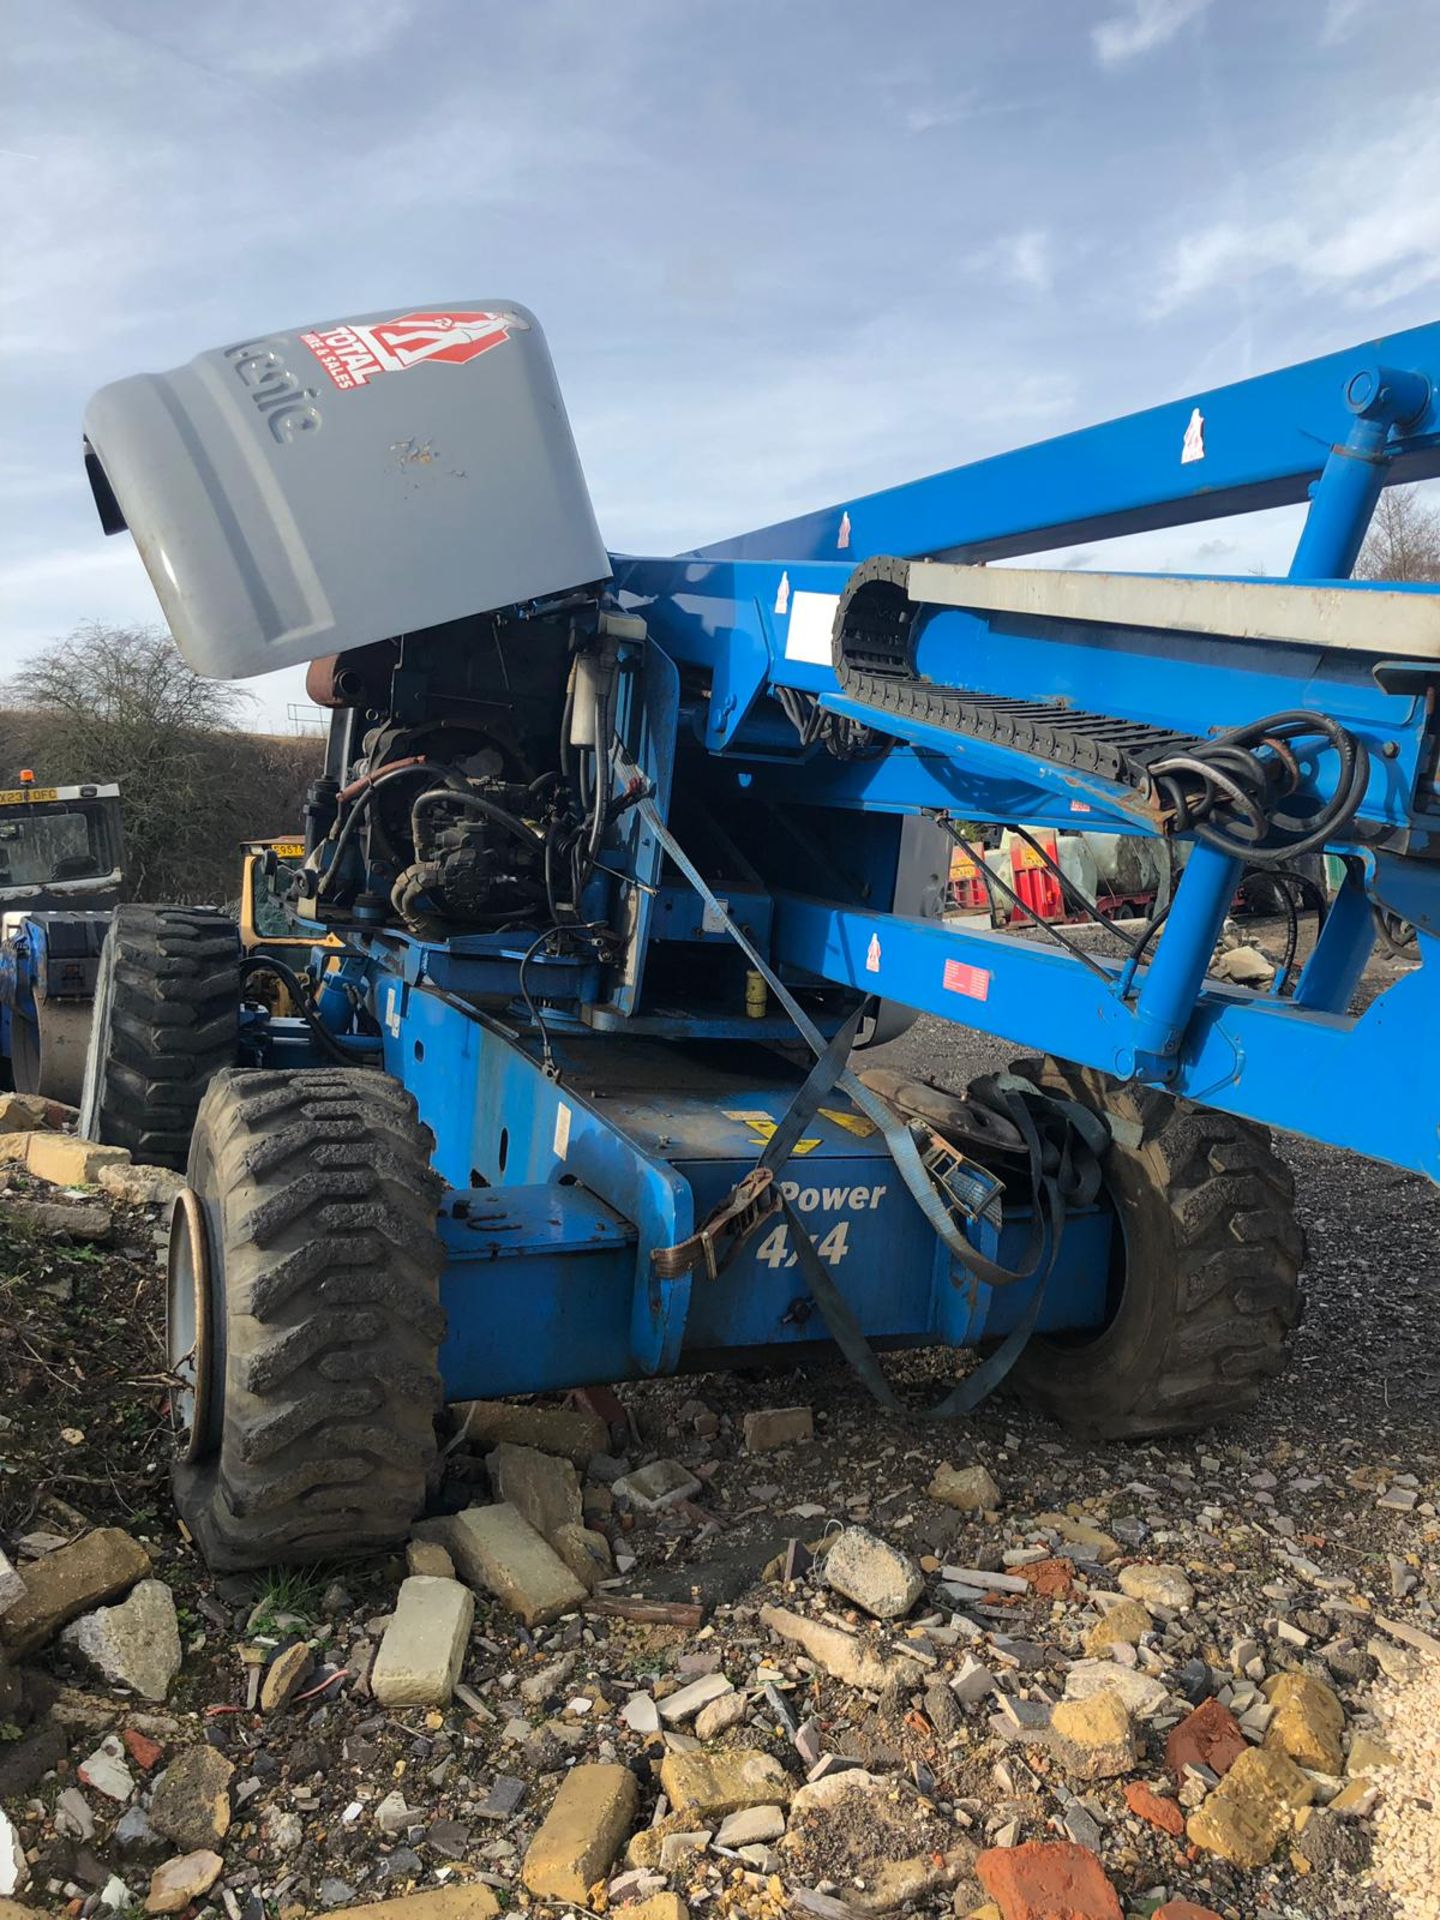 TWO 2 X GENIE BOOM LIFTS MODEL Z45 - 25J 4X4, YEAR 2001 SELLING AS SPARES / REPAIRS *PLUS VAT* - Image 8 of 8